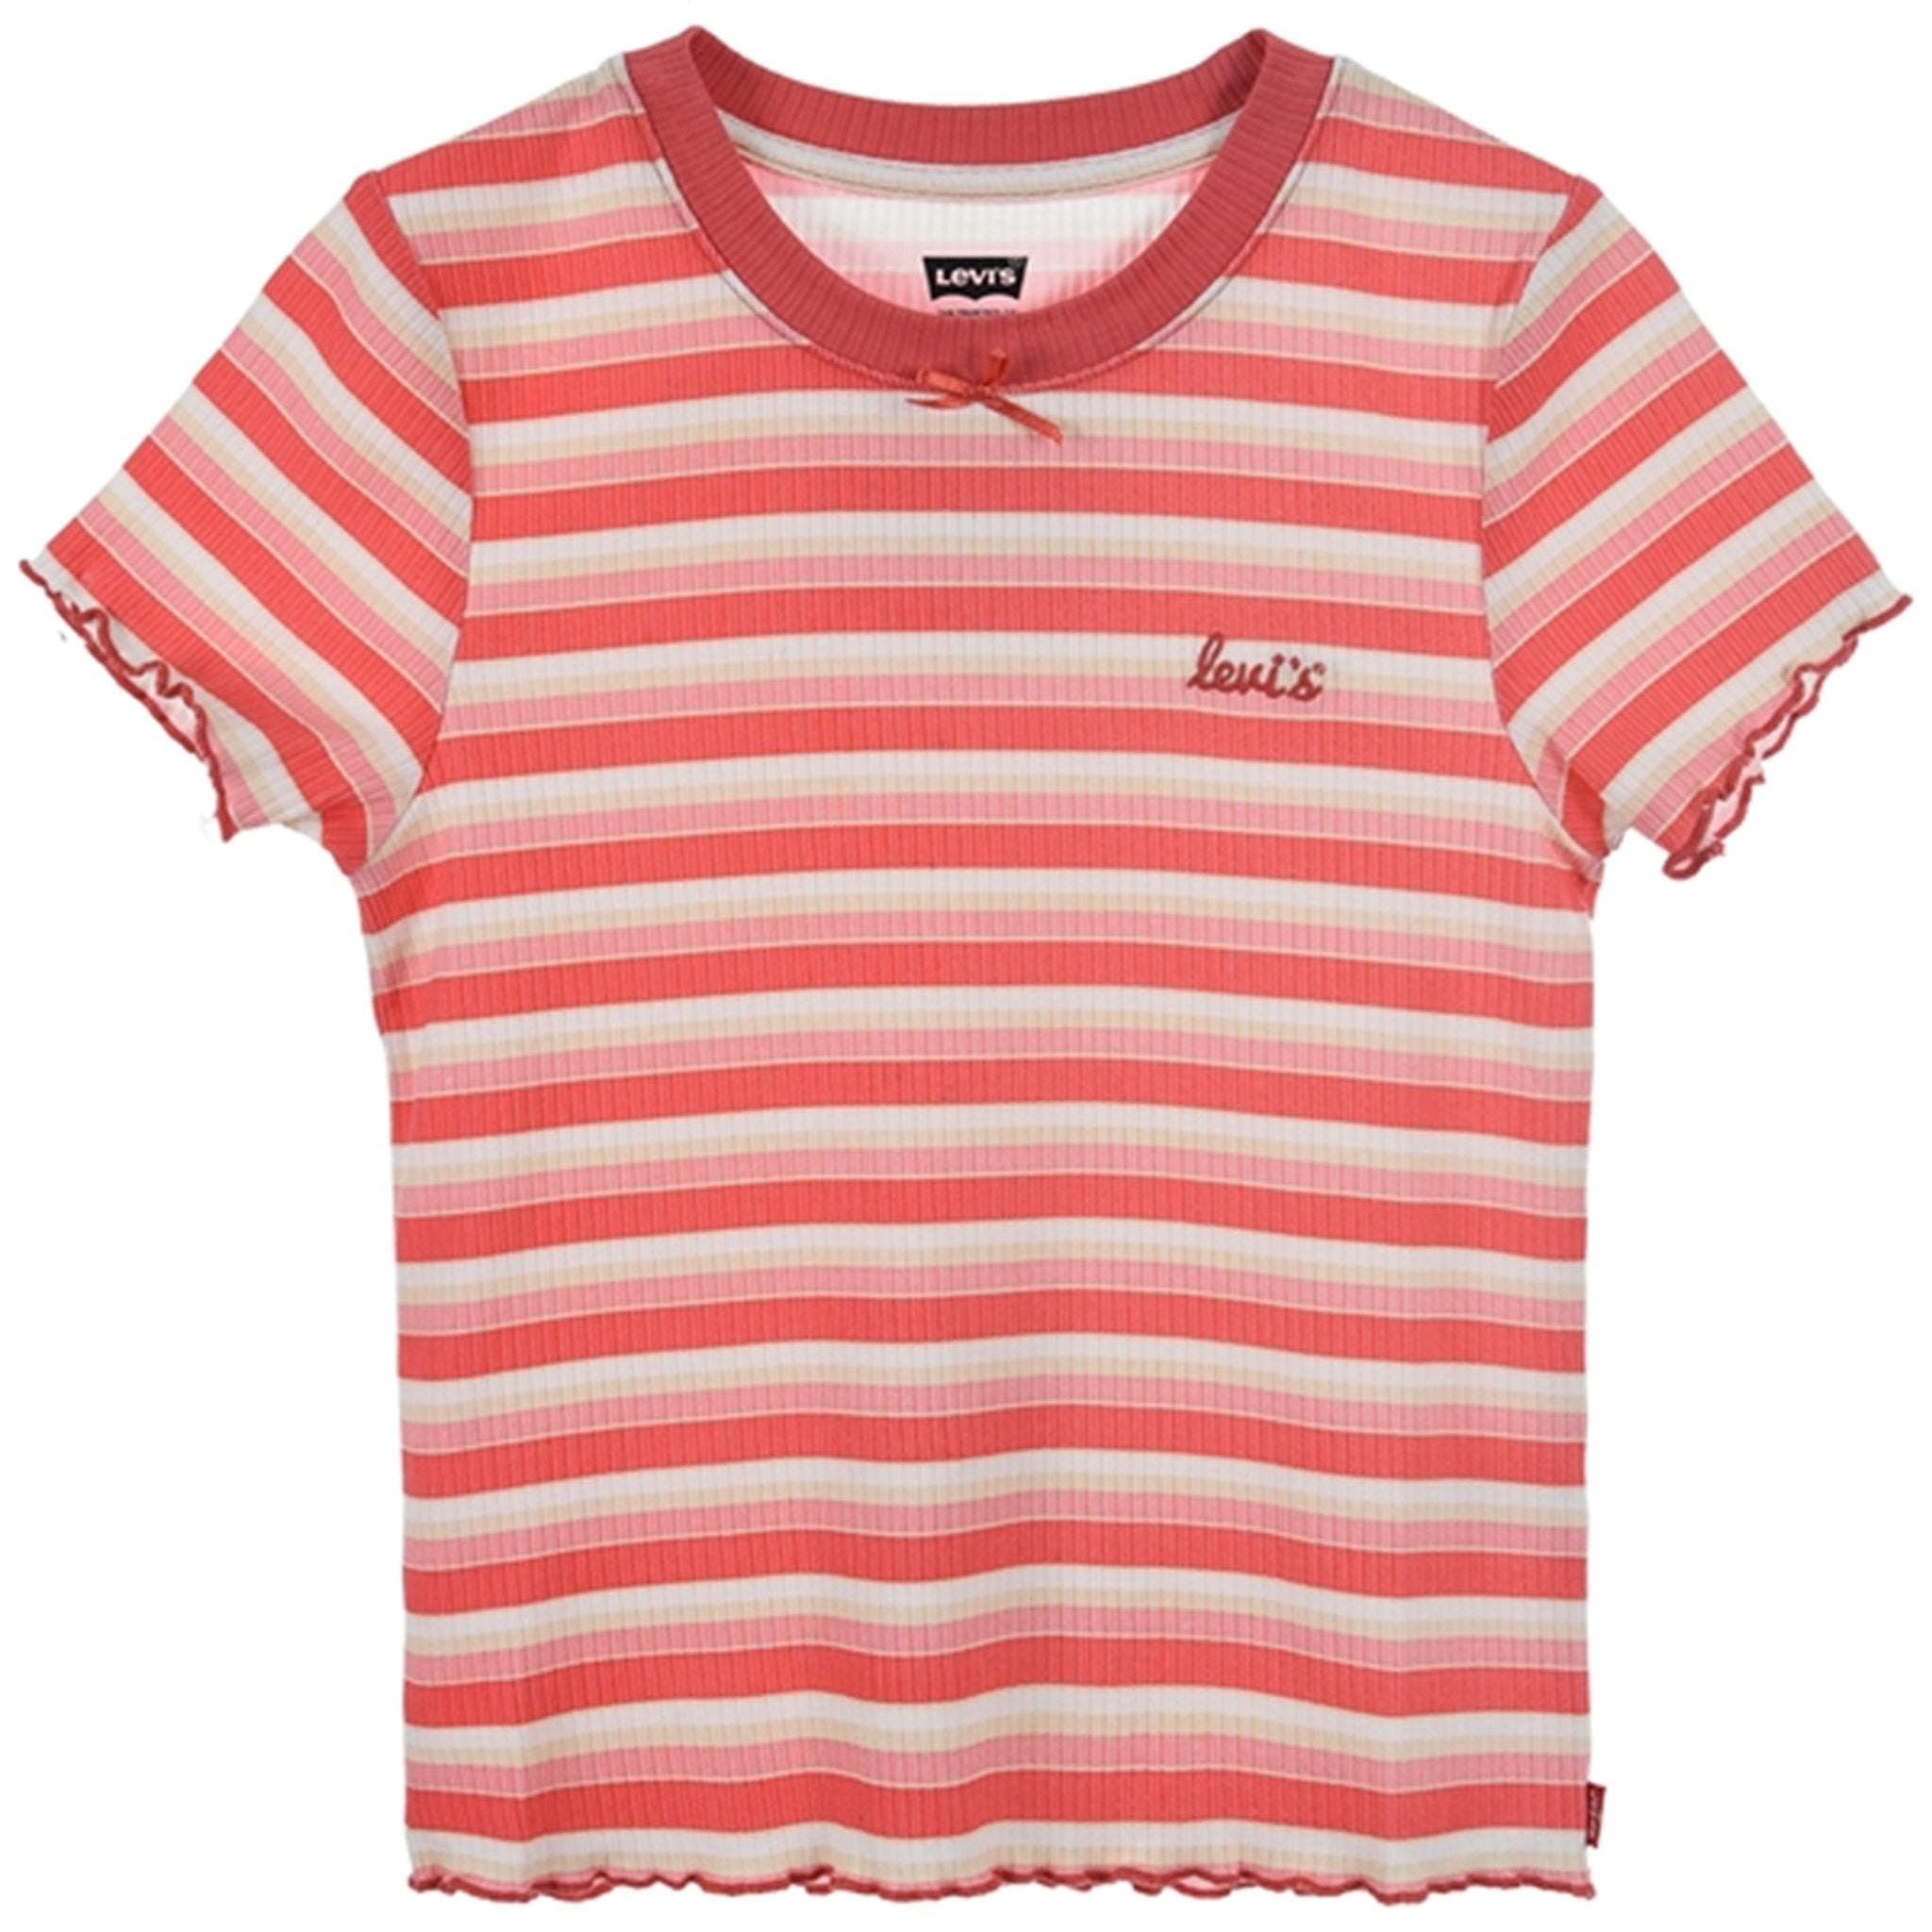 Levi's Striped Meet and Greet Topp Pink